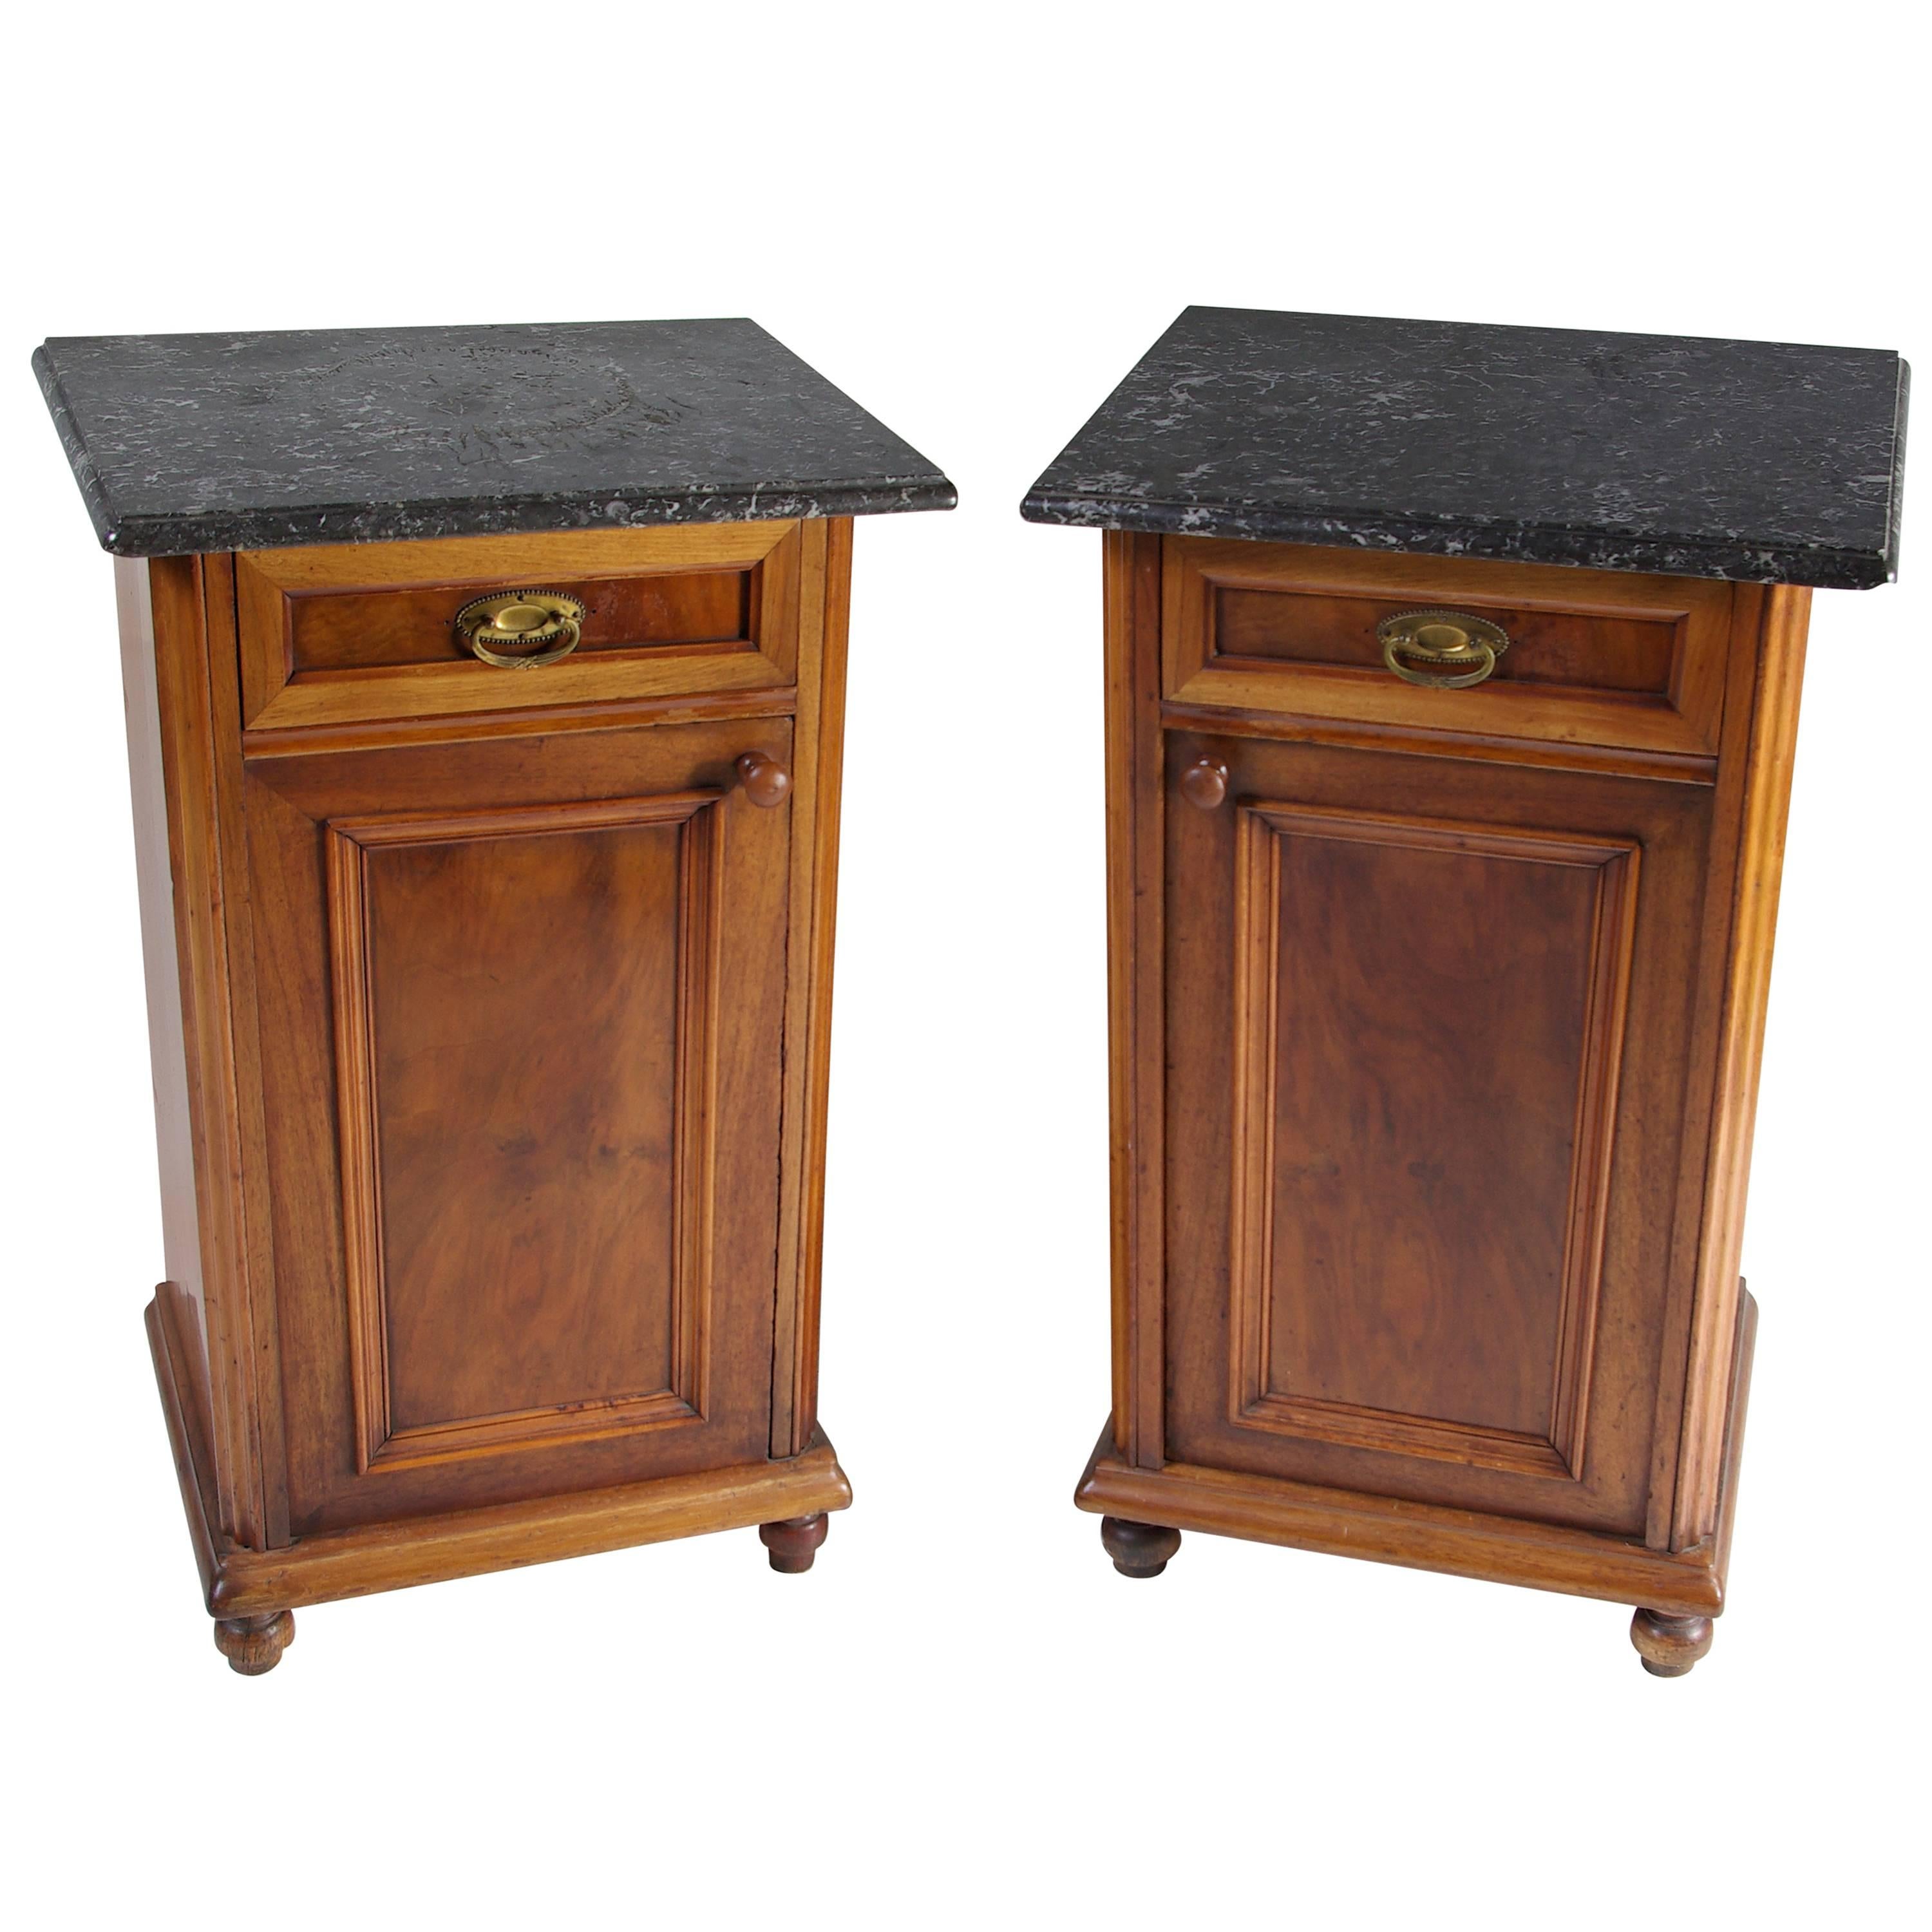 Pair of Antique French Marble-Top Nightstands or End tables